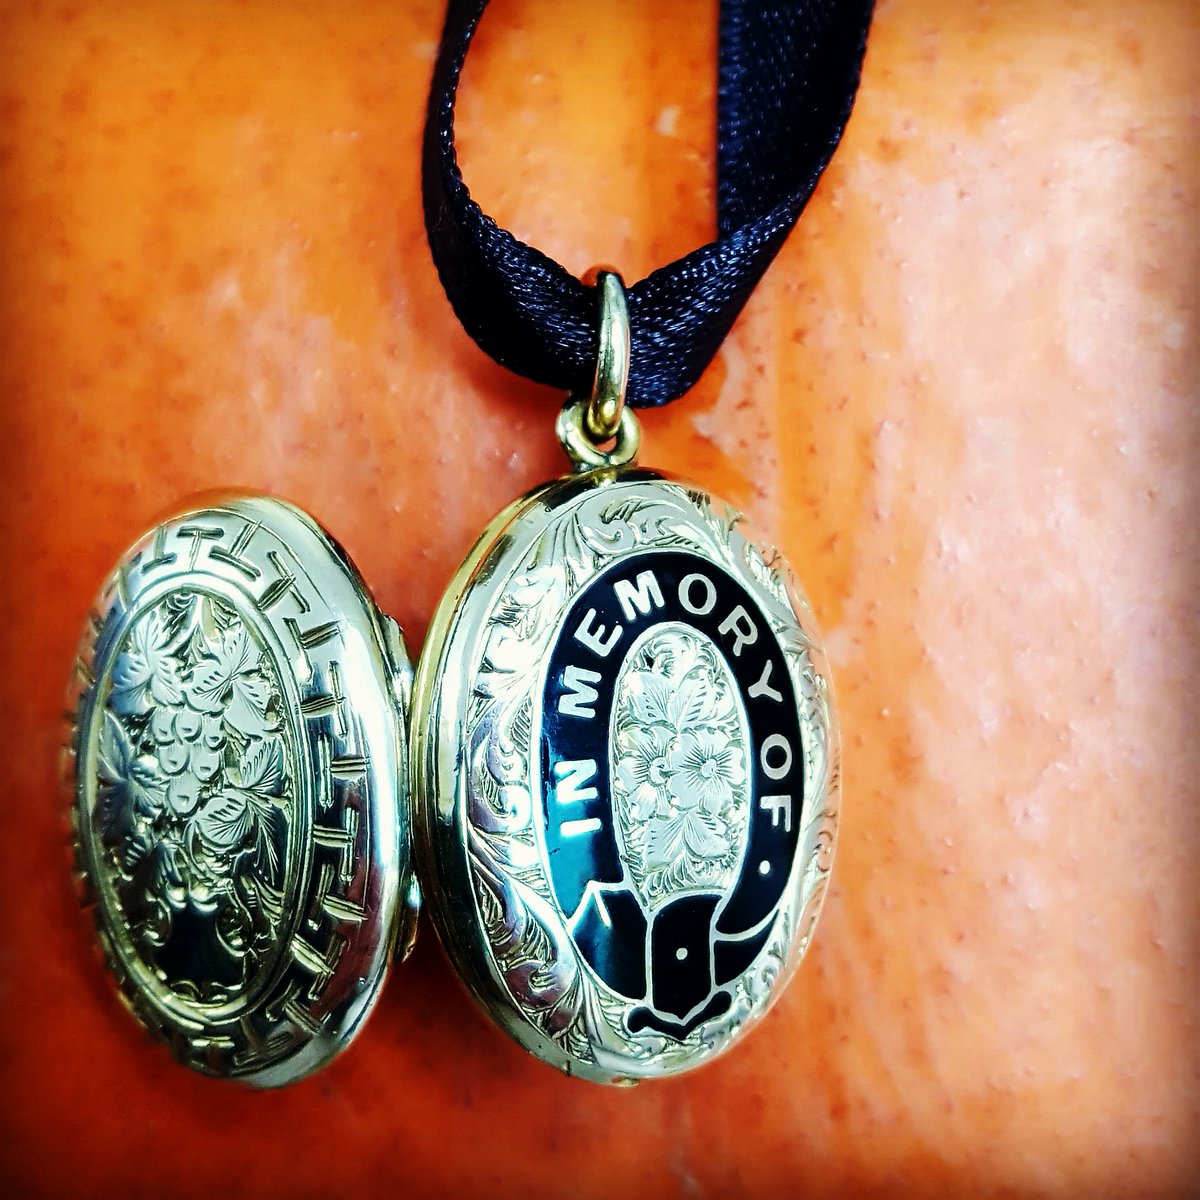 A rare #antique #Victorian gold #locket with black enamel 'In Memory Of' Double Photograph. We are crazy about #MementoMori jewellery; perfect for #Halloween season! #Samhain #mourningjewellery